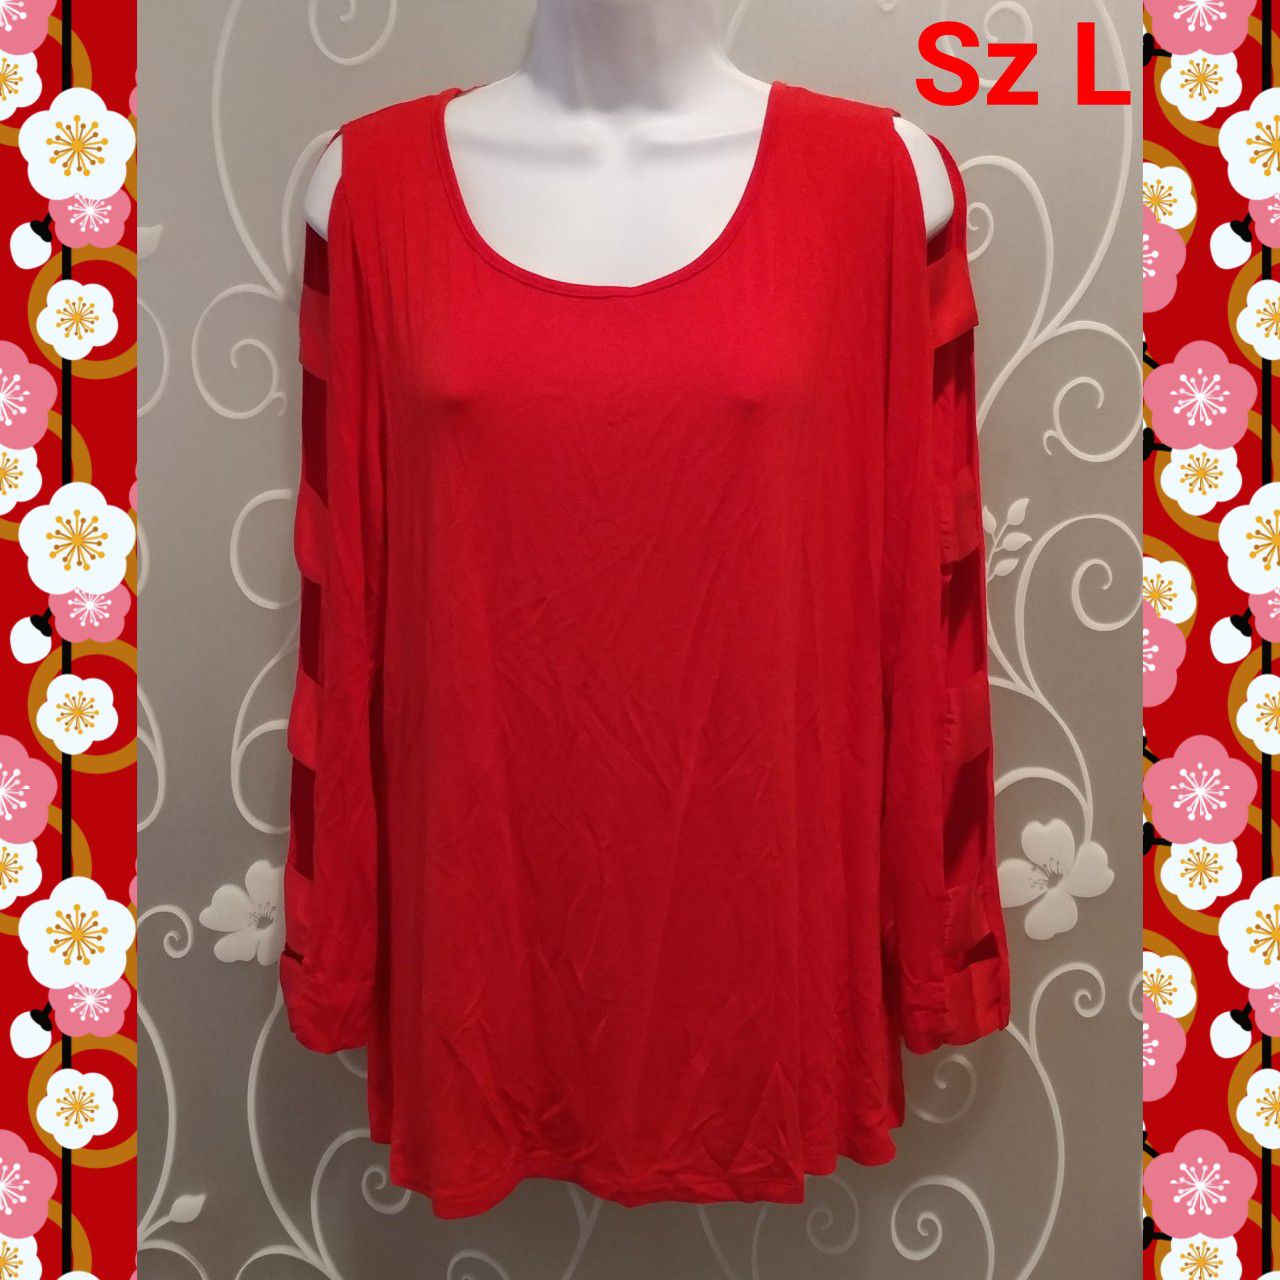 WOMENS SEXY SLOTTED SLEEVE TOP SIZE L